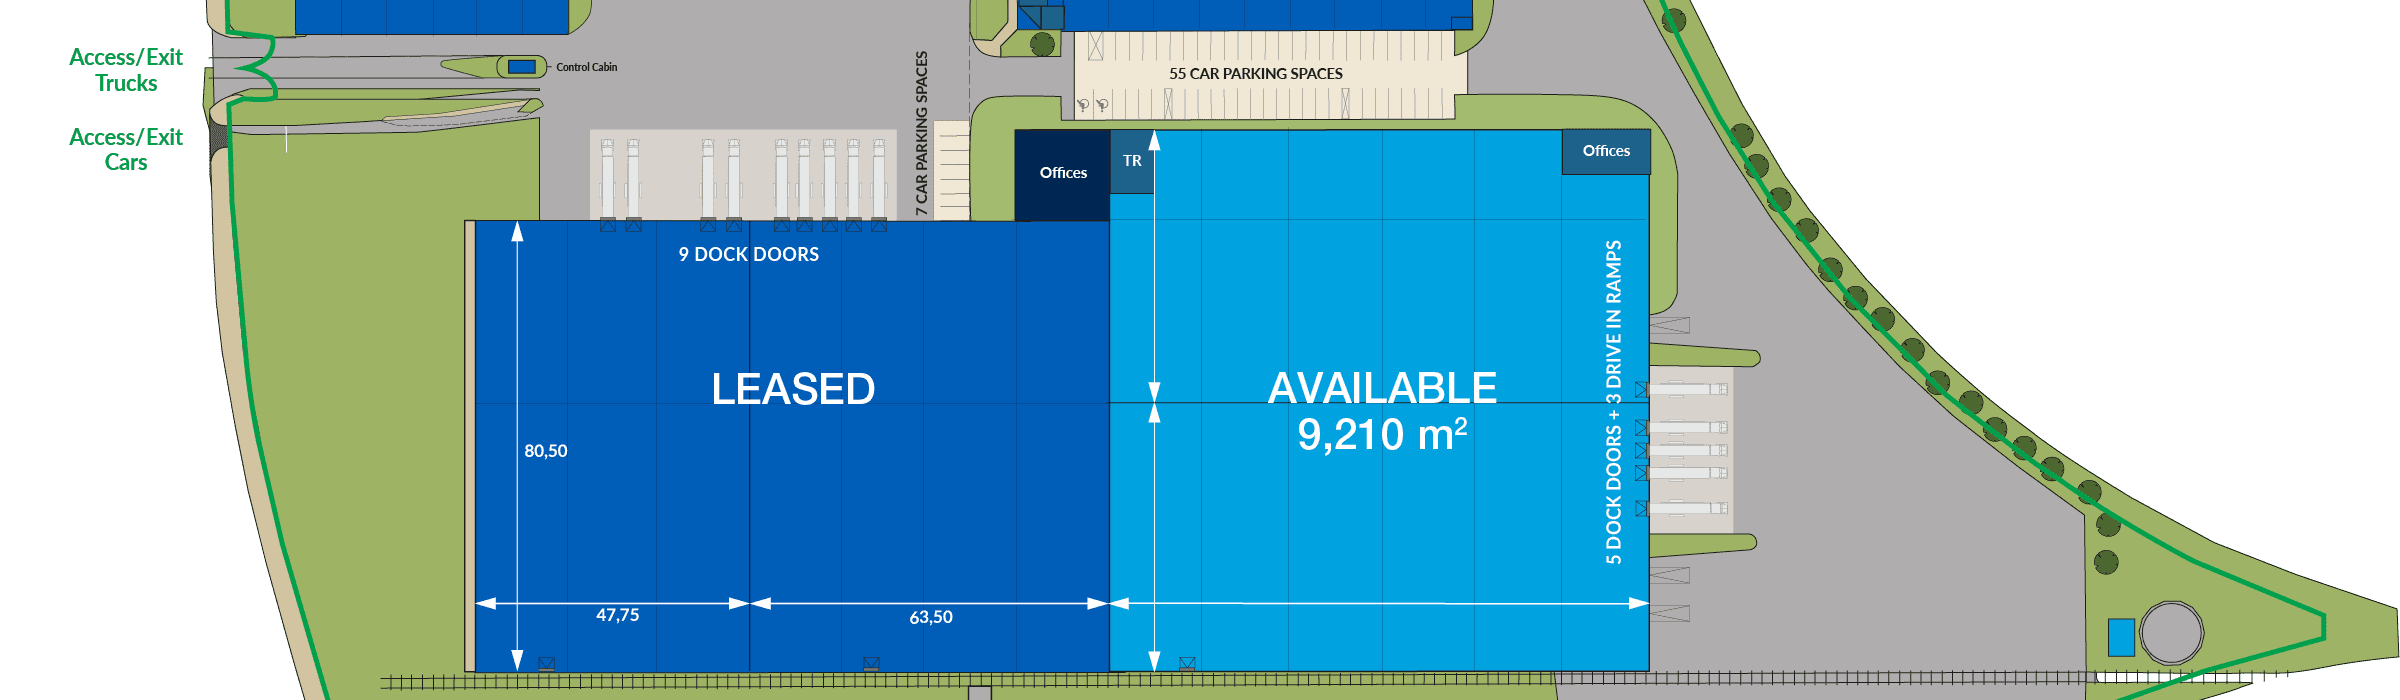 Plan of available warehouse space in GLP Orleans Logistics Park 1.